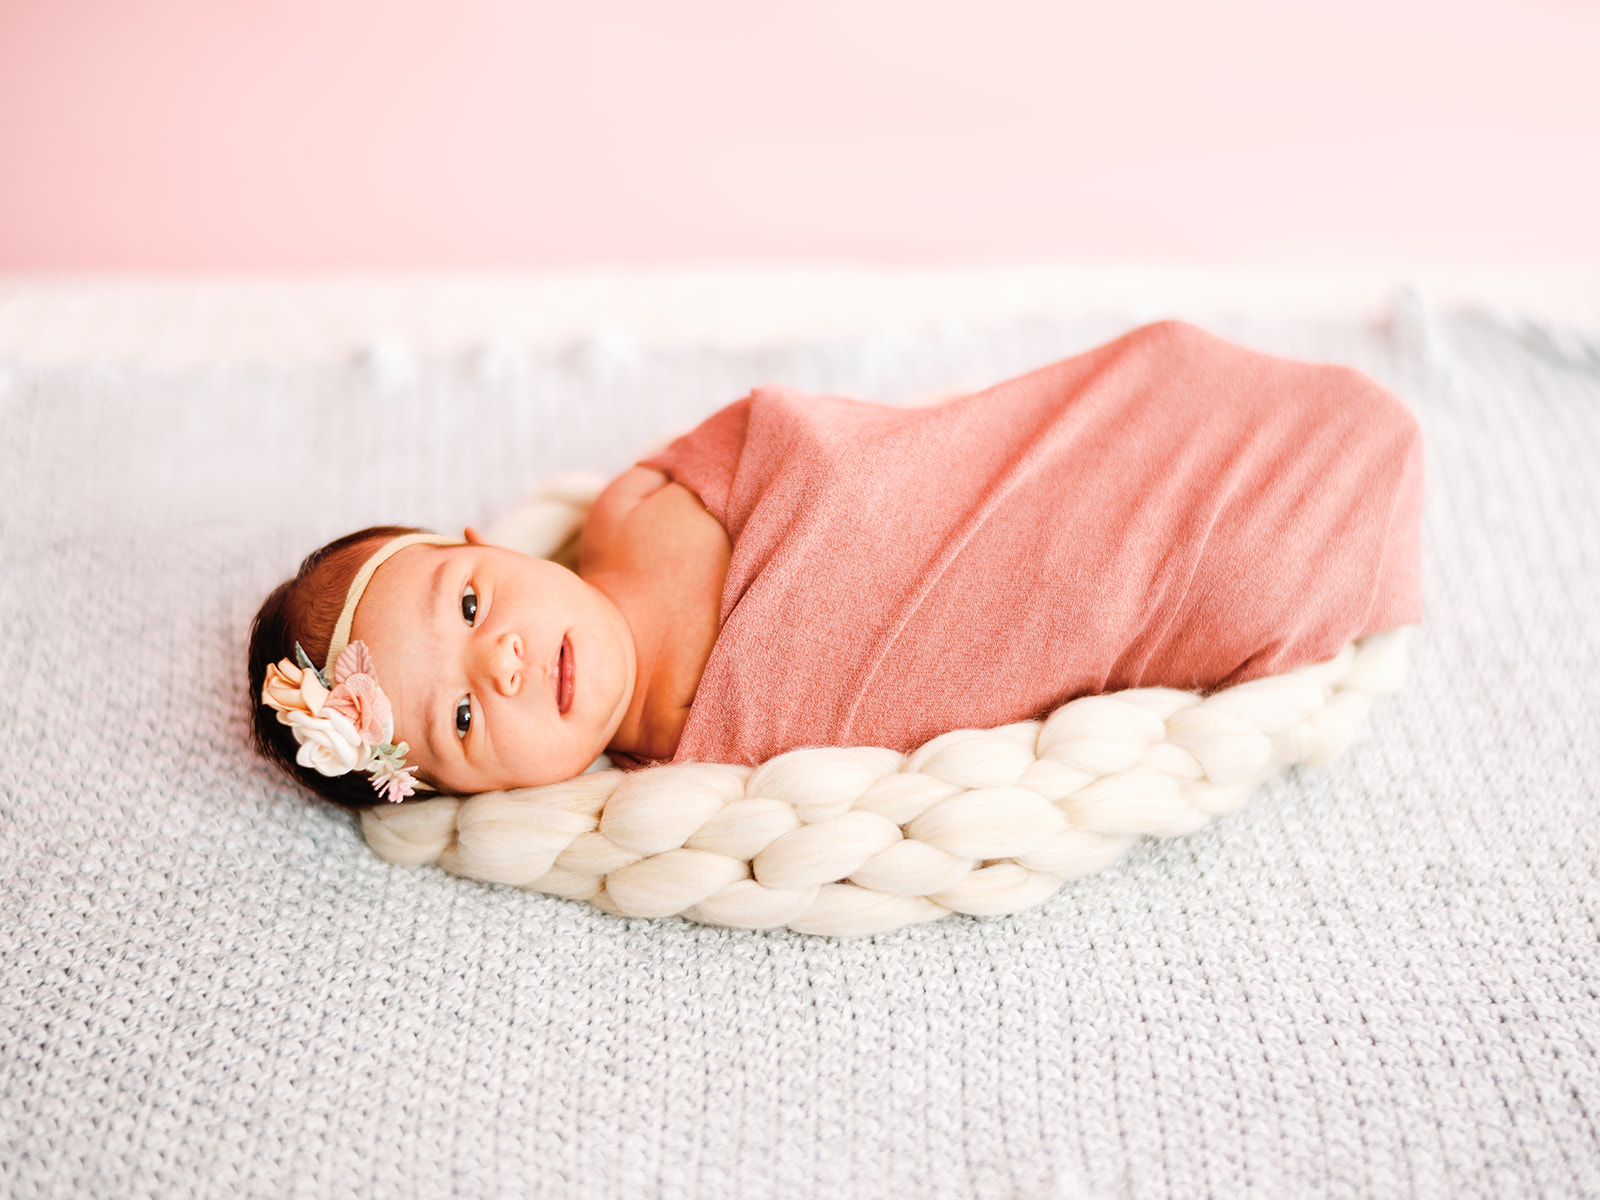 Ava - Newborn - Family Photography - Newborn Photography - At-Home Portraits - Color backdrop - Pink Backdrop - West Covina - California